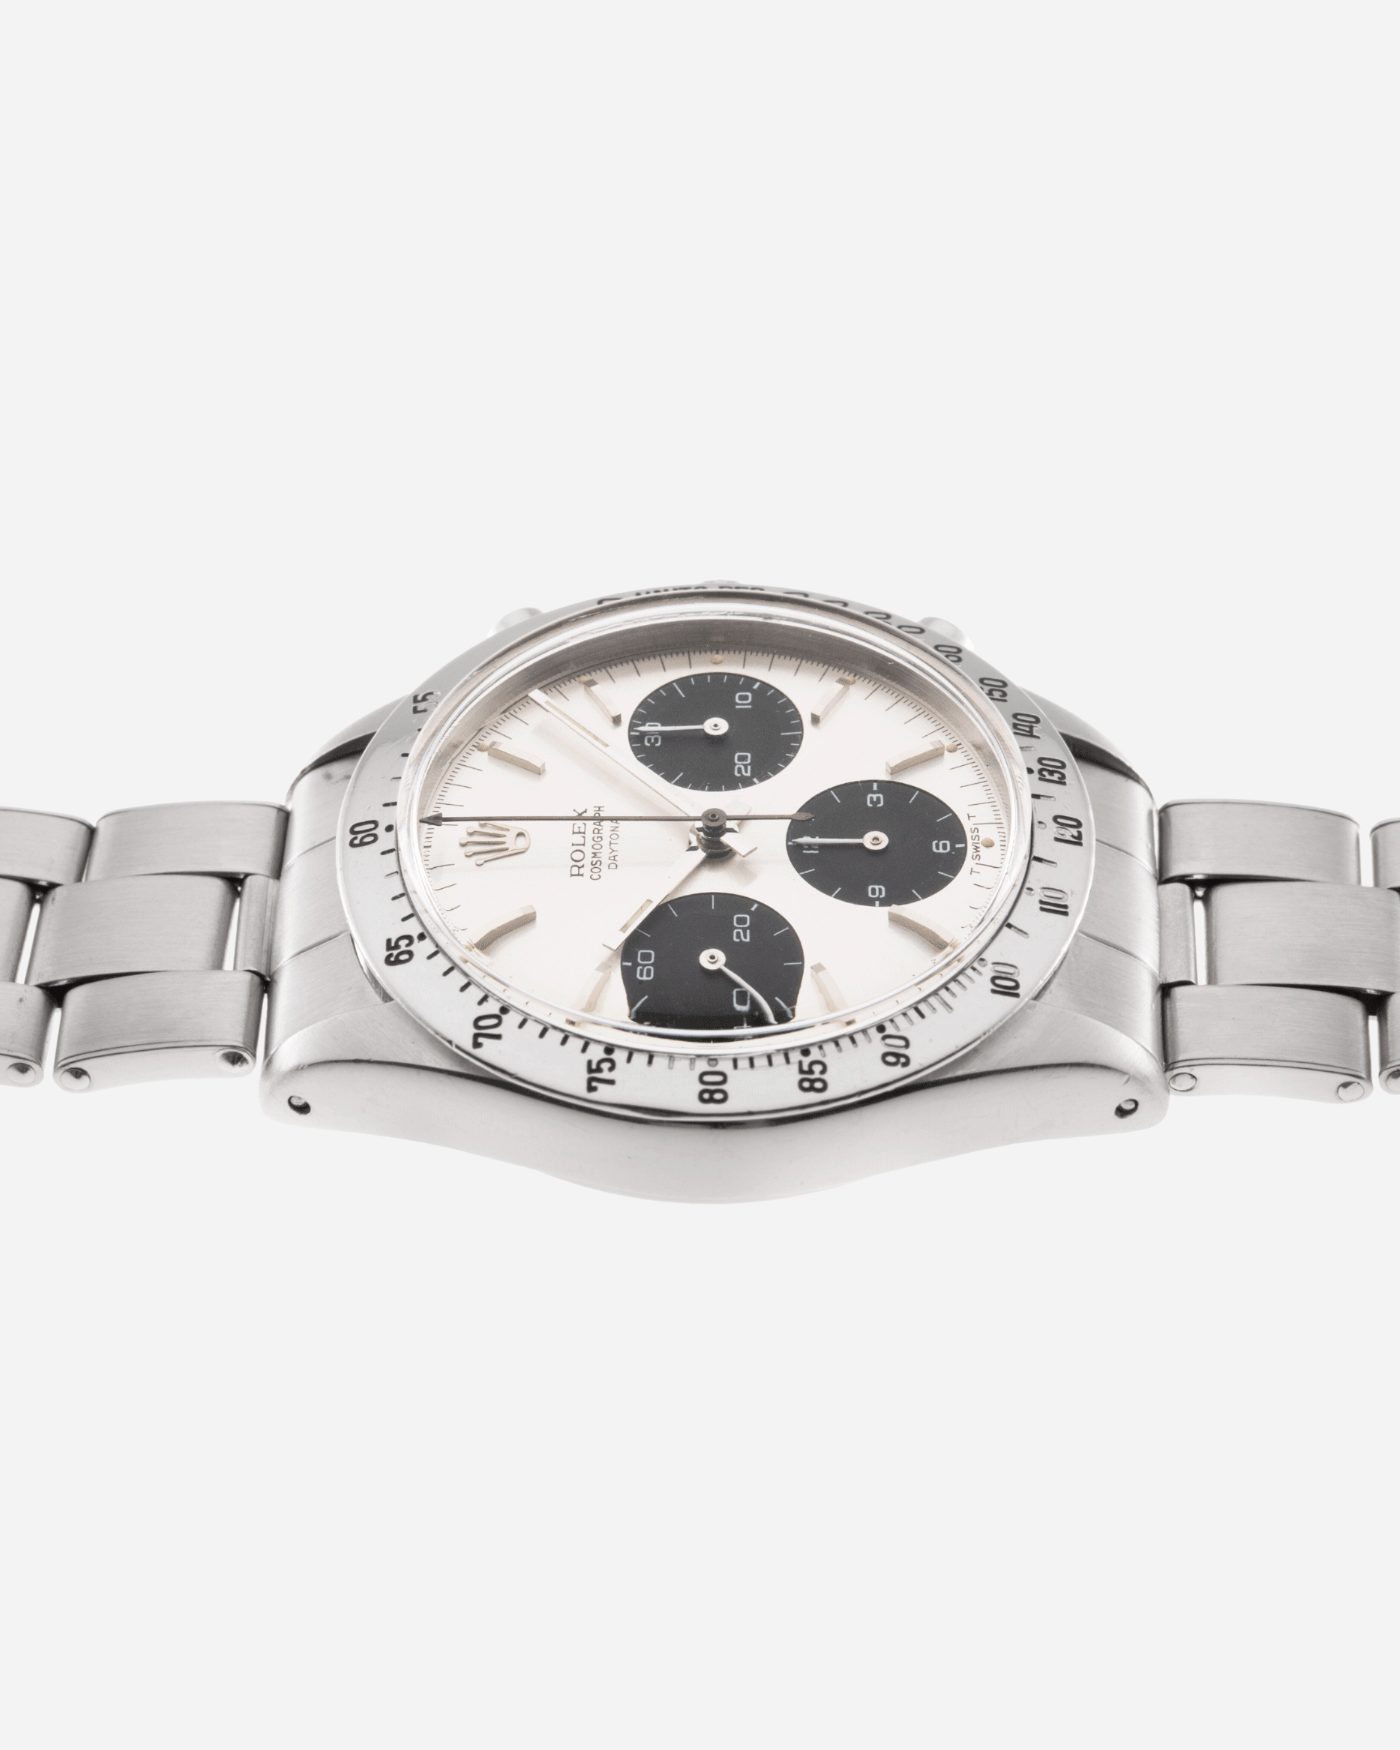 Brand: Rolex Year: 1966 Model: Cosmograph Daytona Reference Number: 6239 Serial Number: 1,4XX,XXX Material: Stainless Steel Movement: Valjoux 72 Case Diameter: 36.5mm Strap: Rolex 7205 Folded Oyster Bracelet with 57 Endlinks, Stamped 4.66